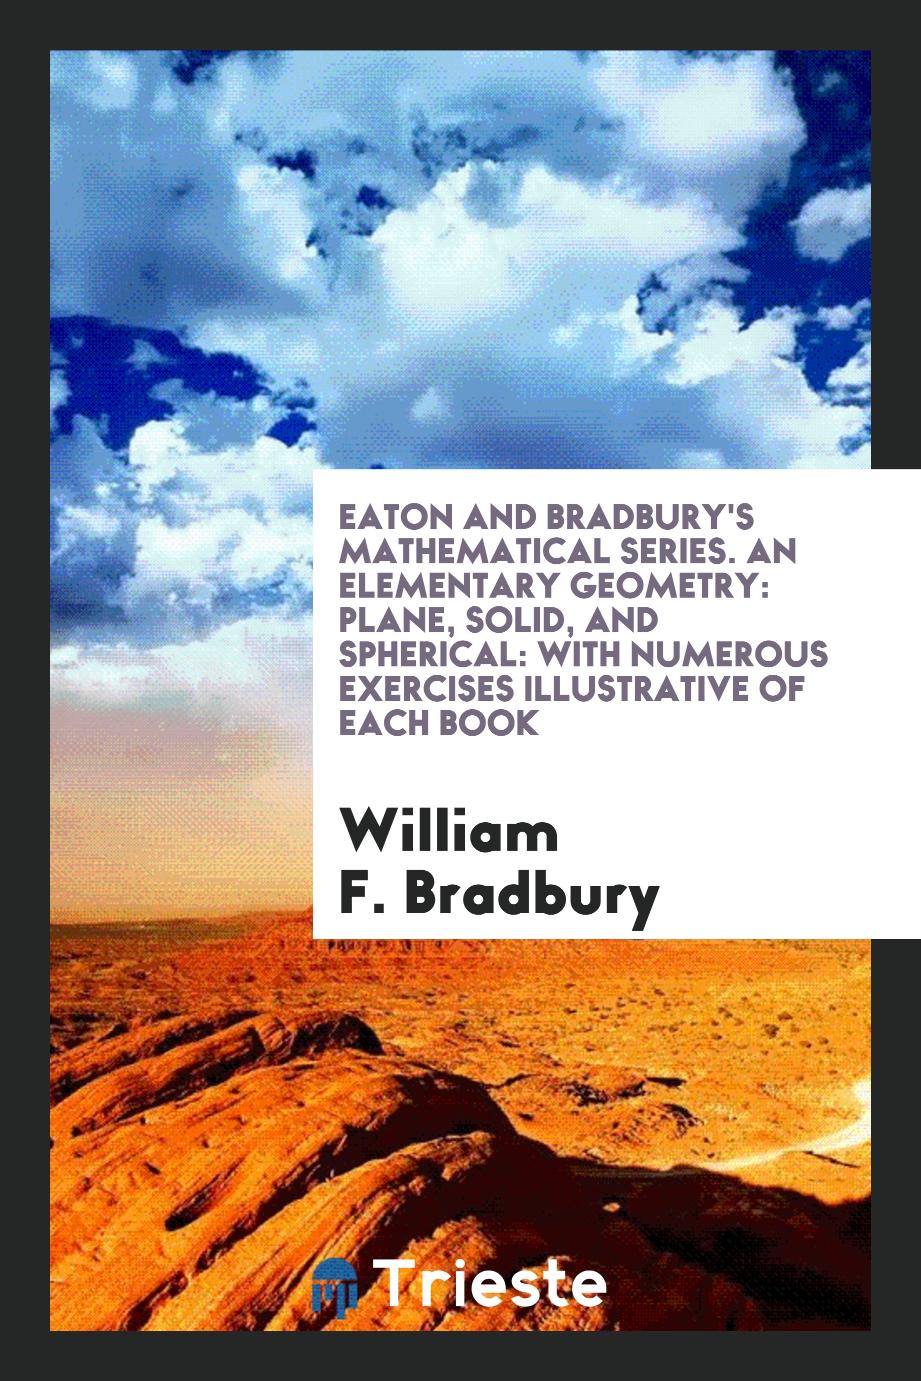 Eaton and Bradbury's Mathematical Series. An Elementary Geometry: Plane, Solid, and Spherical: With Numerous Exercises Illustrative of Each Book